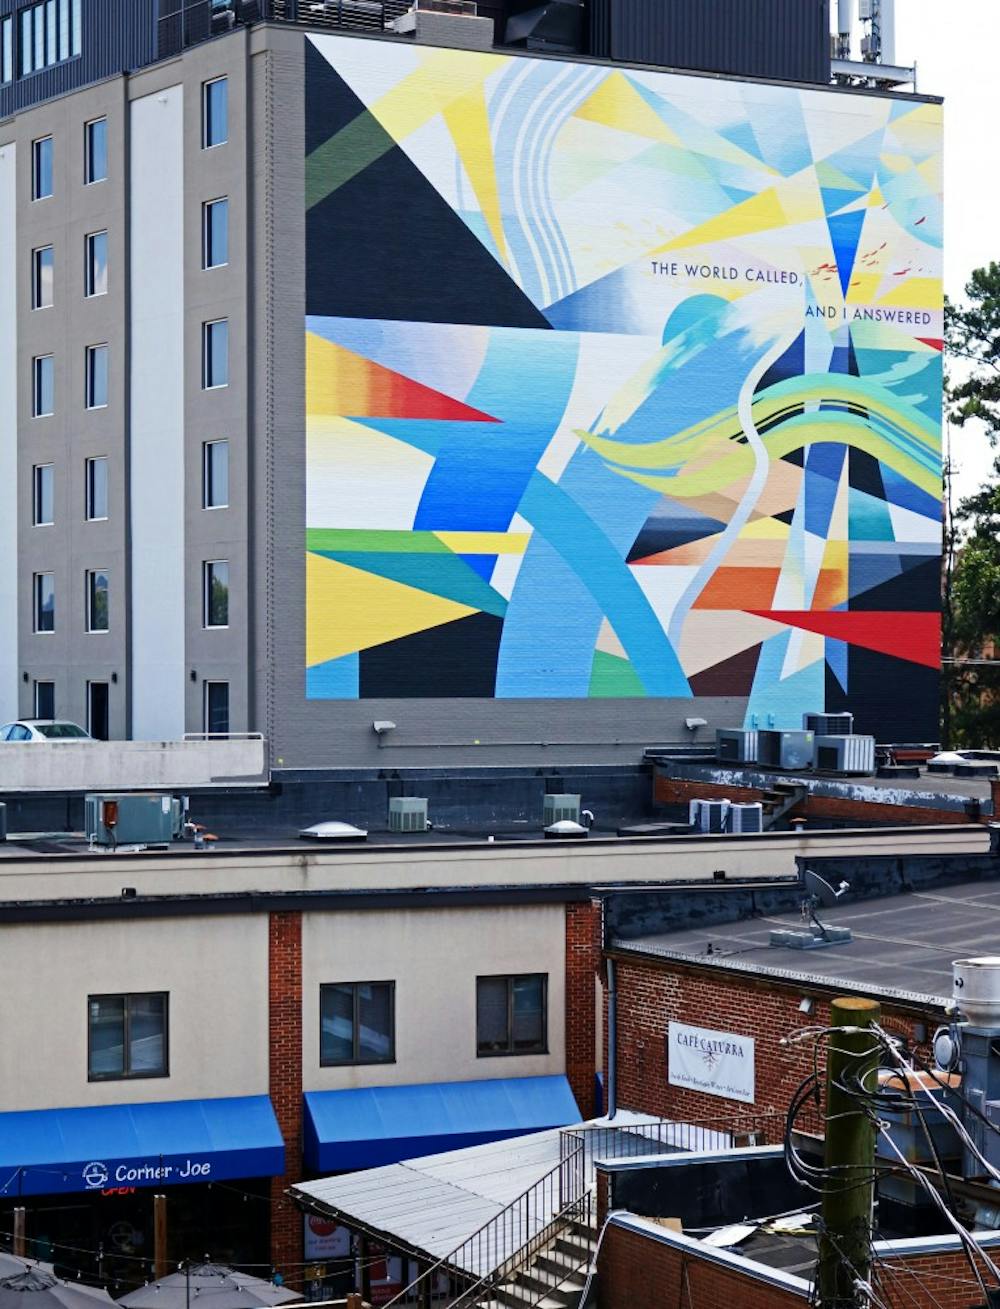 <p>The mural &mdash; painted by artist David Guinn &mdash; debuted on the southwest wall of the hotel in August and includes a quote from “Testimonial,” a poem by U.S. Poet Laureate and English Prof. Rita Dove.</p>